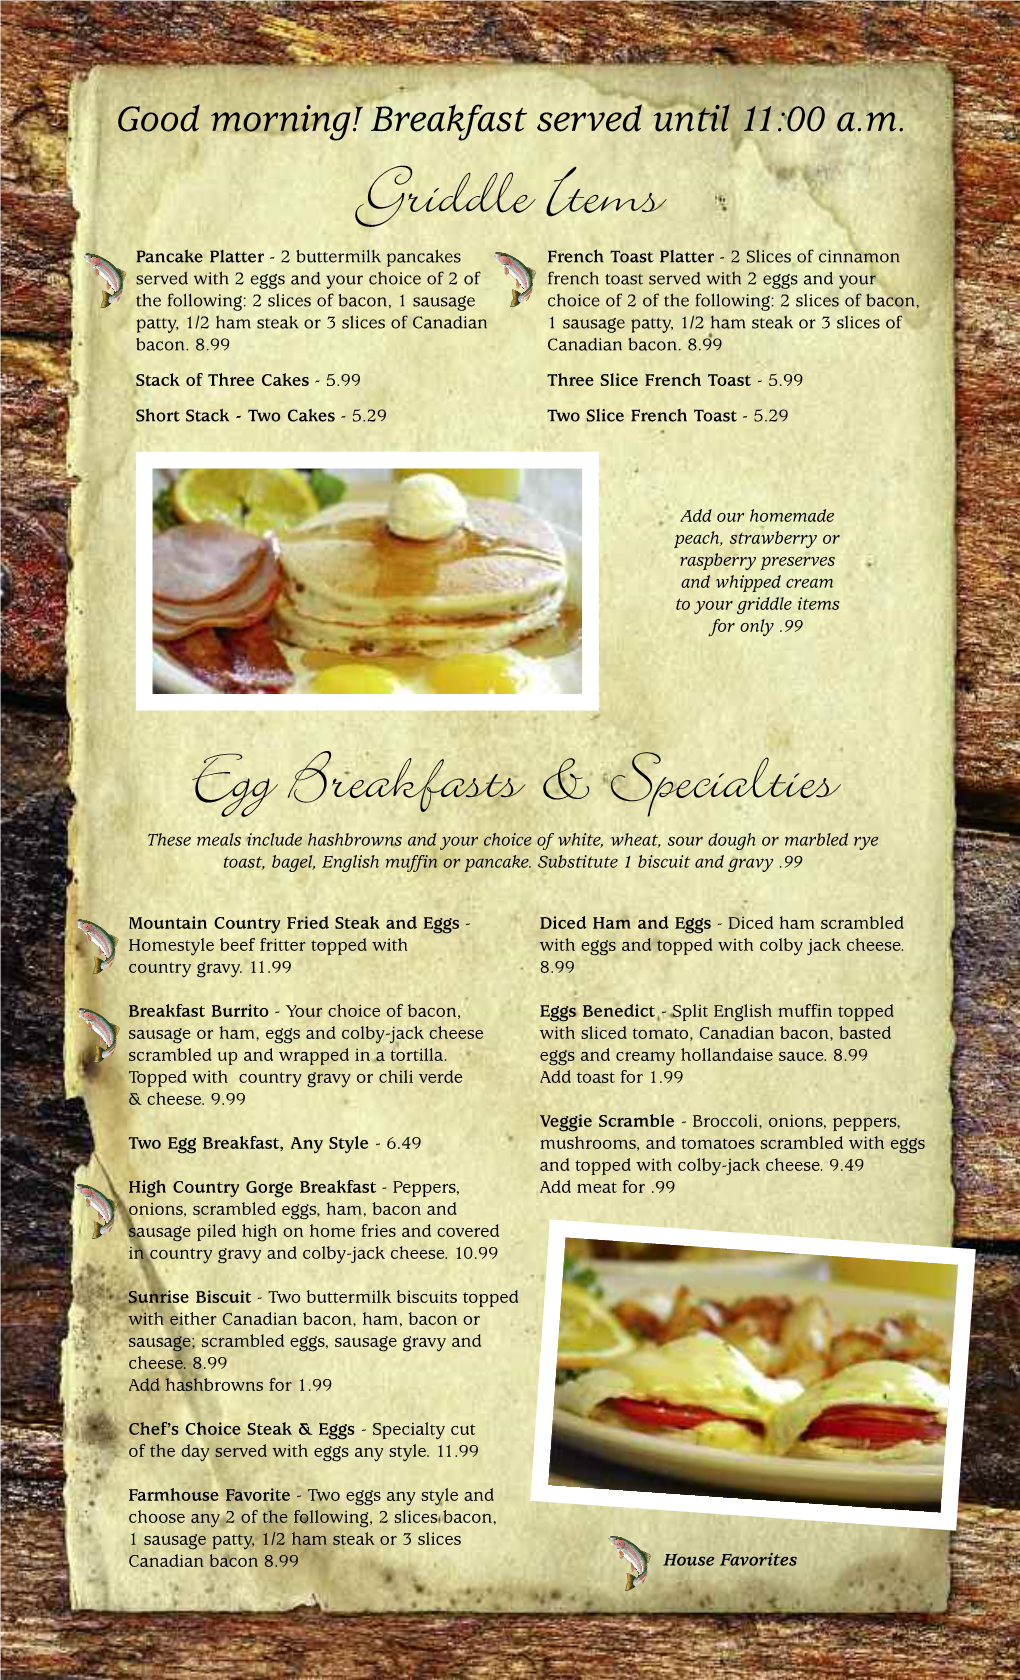 Egg Breakfasts & Specialties Griddle Items